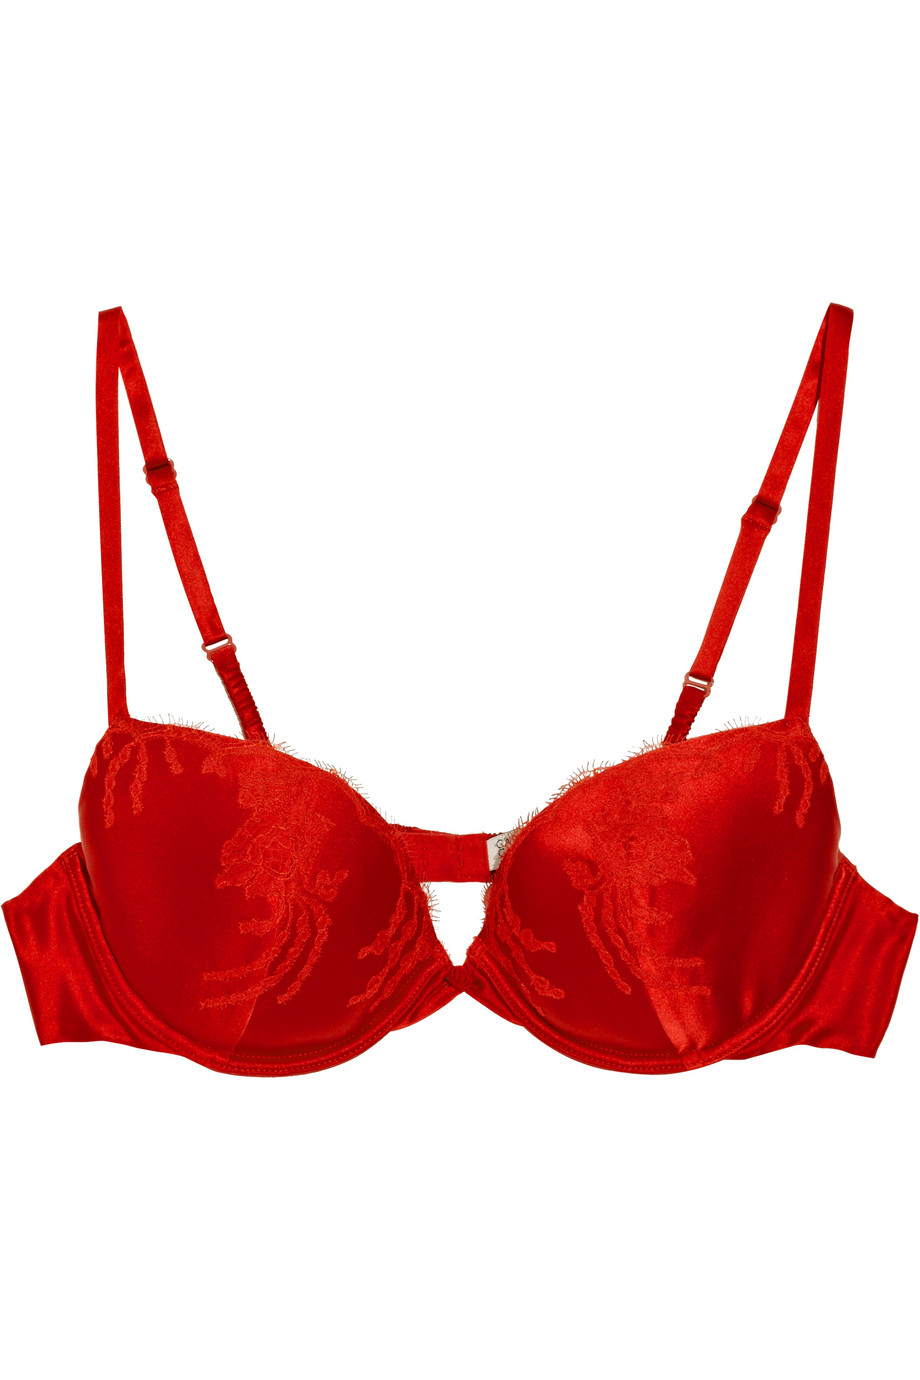 Carine Gilson Silk-blend Satin and Lace Push-up Bra in Red | Lyst